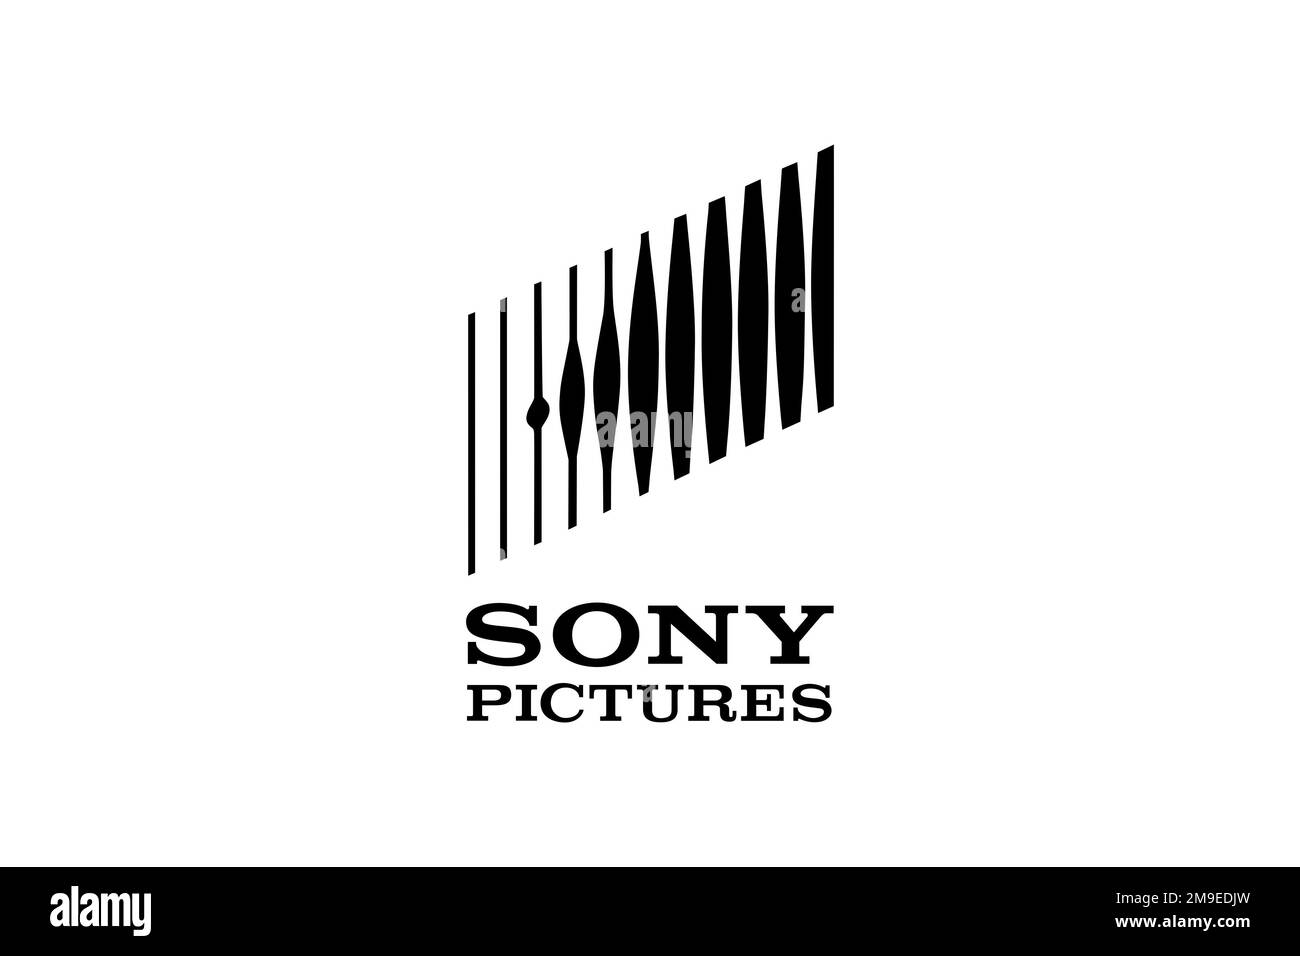 Sony Pictures, logo, fond blanc Banque D'Images